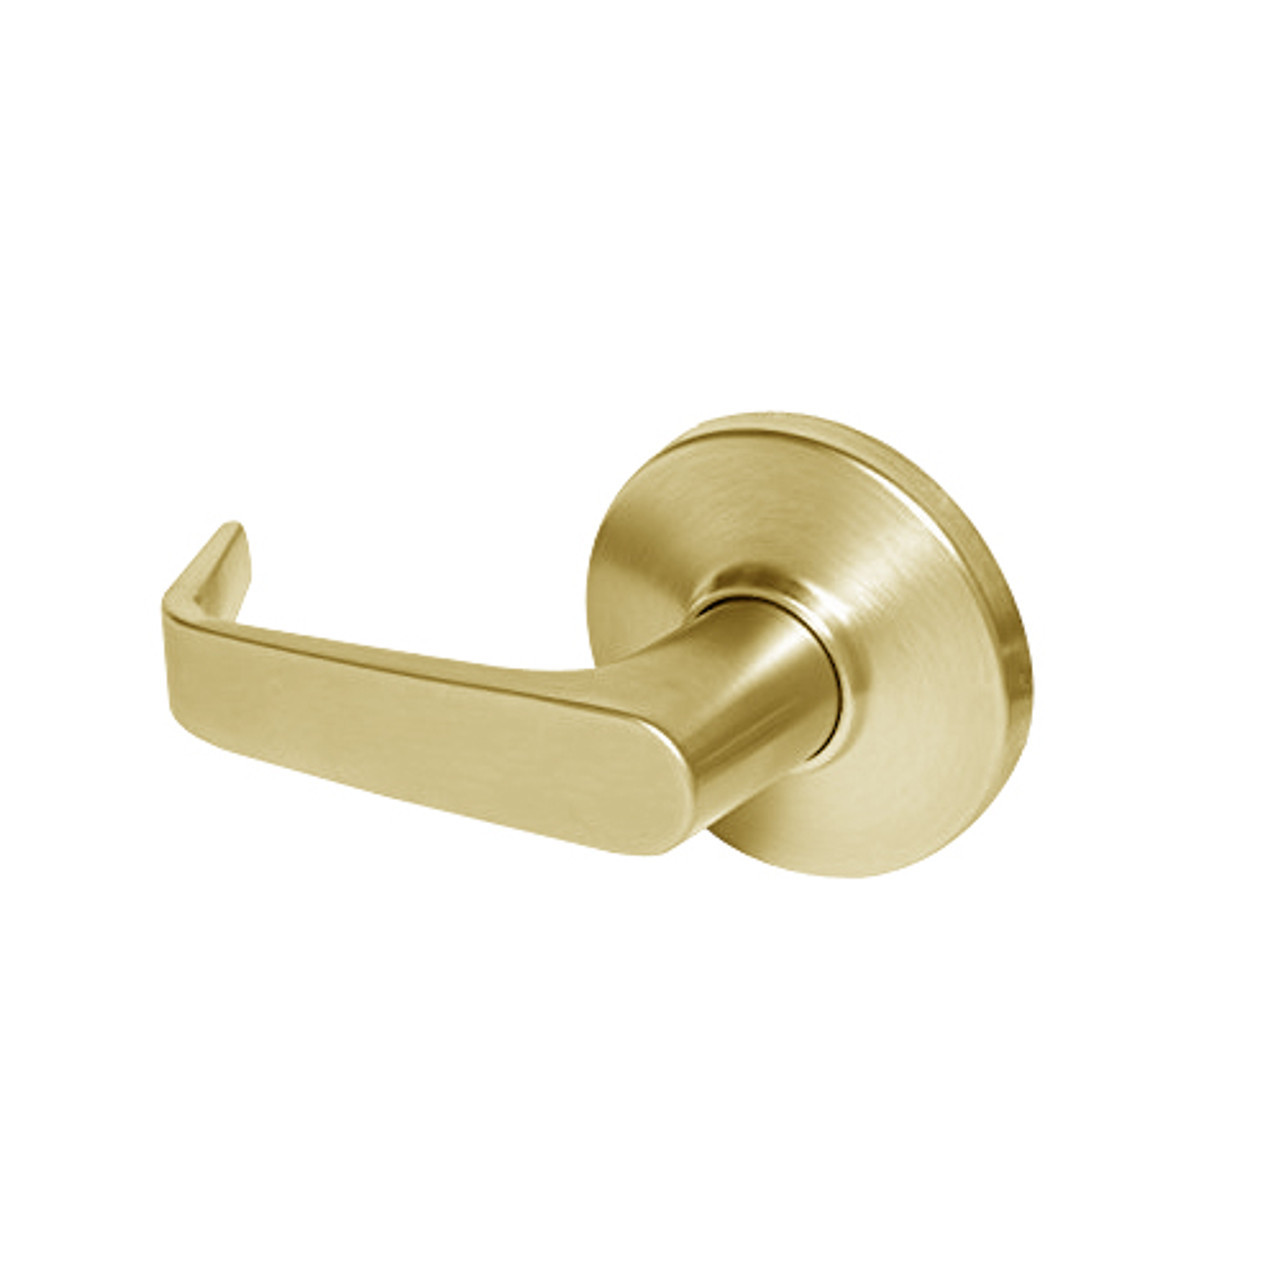 9K30Y15DSTK605LM Best 9K Series Exit Heavy Duty Cylindrical Lever Locks with Contour Angle with Return Lever Design in Bright Brass